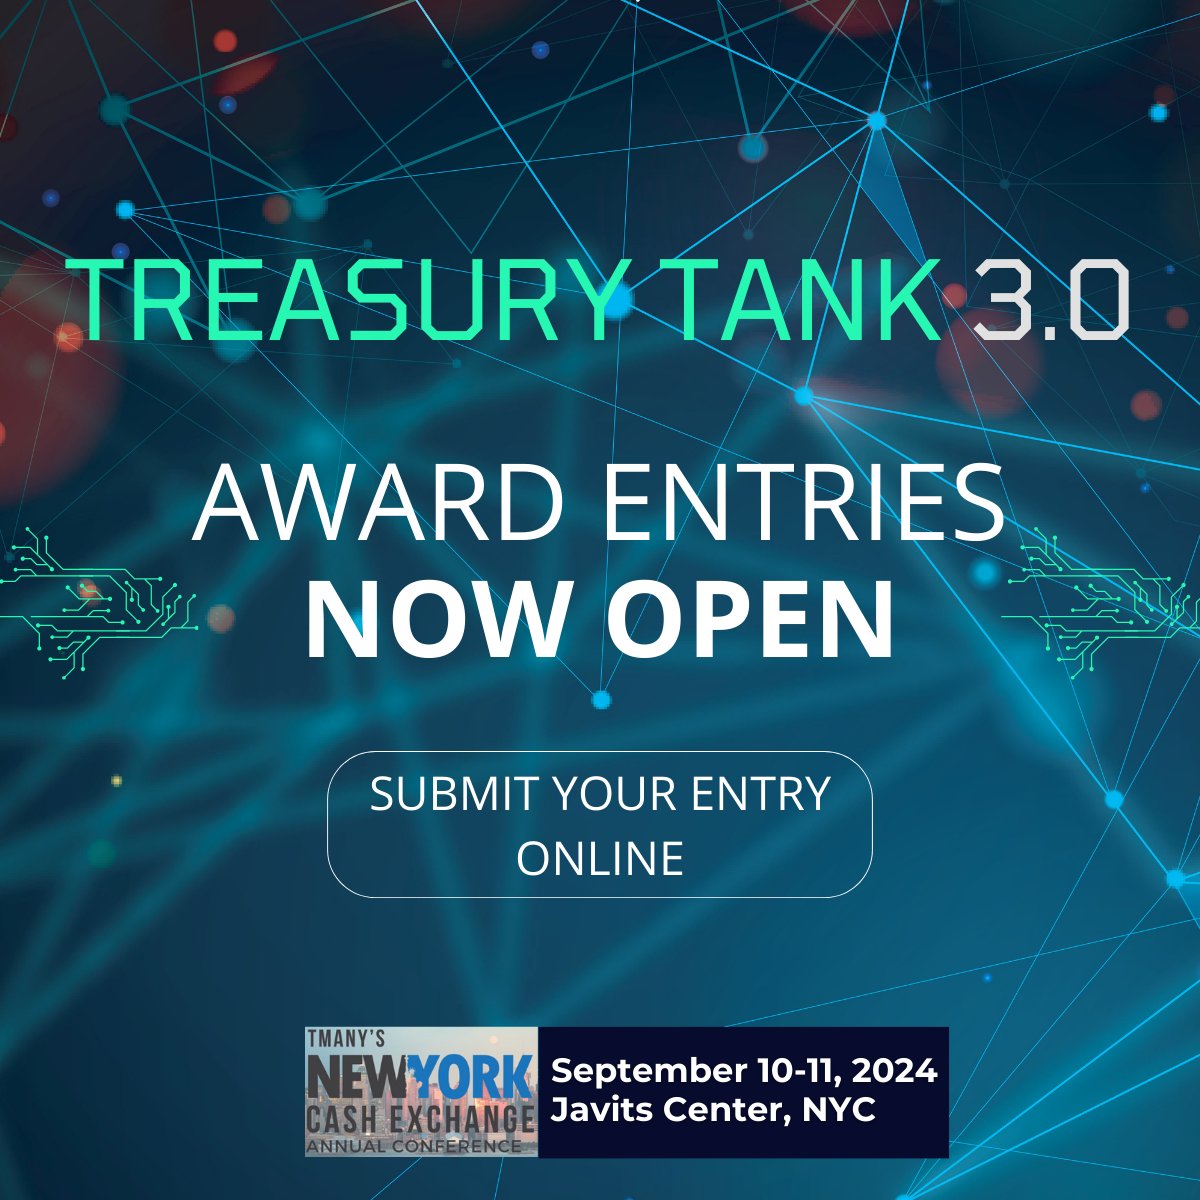 Entries now open for the 2024 Treasury Tank 3.0 Awards! Lead the way in treasury innovation at the New York Cash Exchange on Sept 10-11, 2024. Submission deadline: April 30, 2024. Submit your entry at ow.ly/9bQI50QrR1V

#tmany #NYCE2024 #cashmanagement #treasurytech